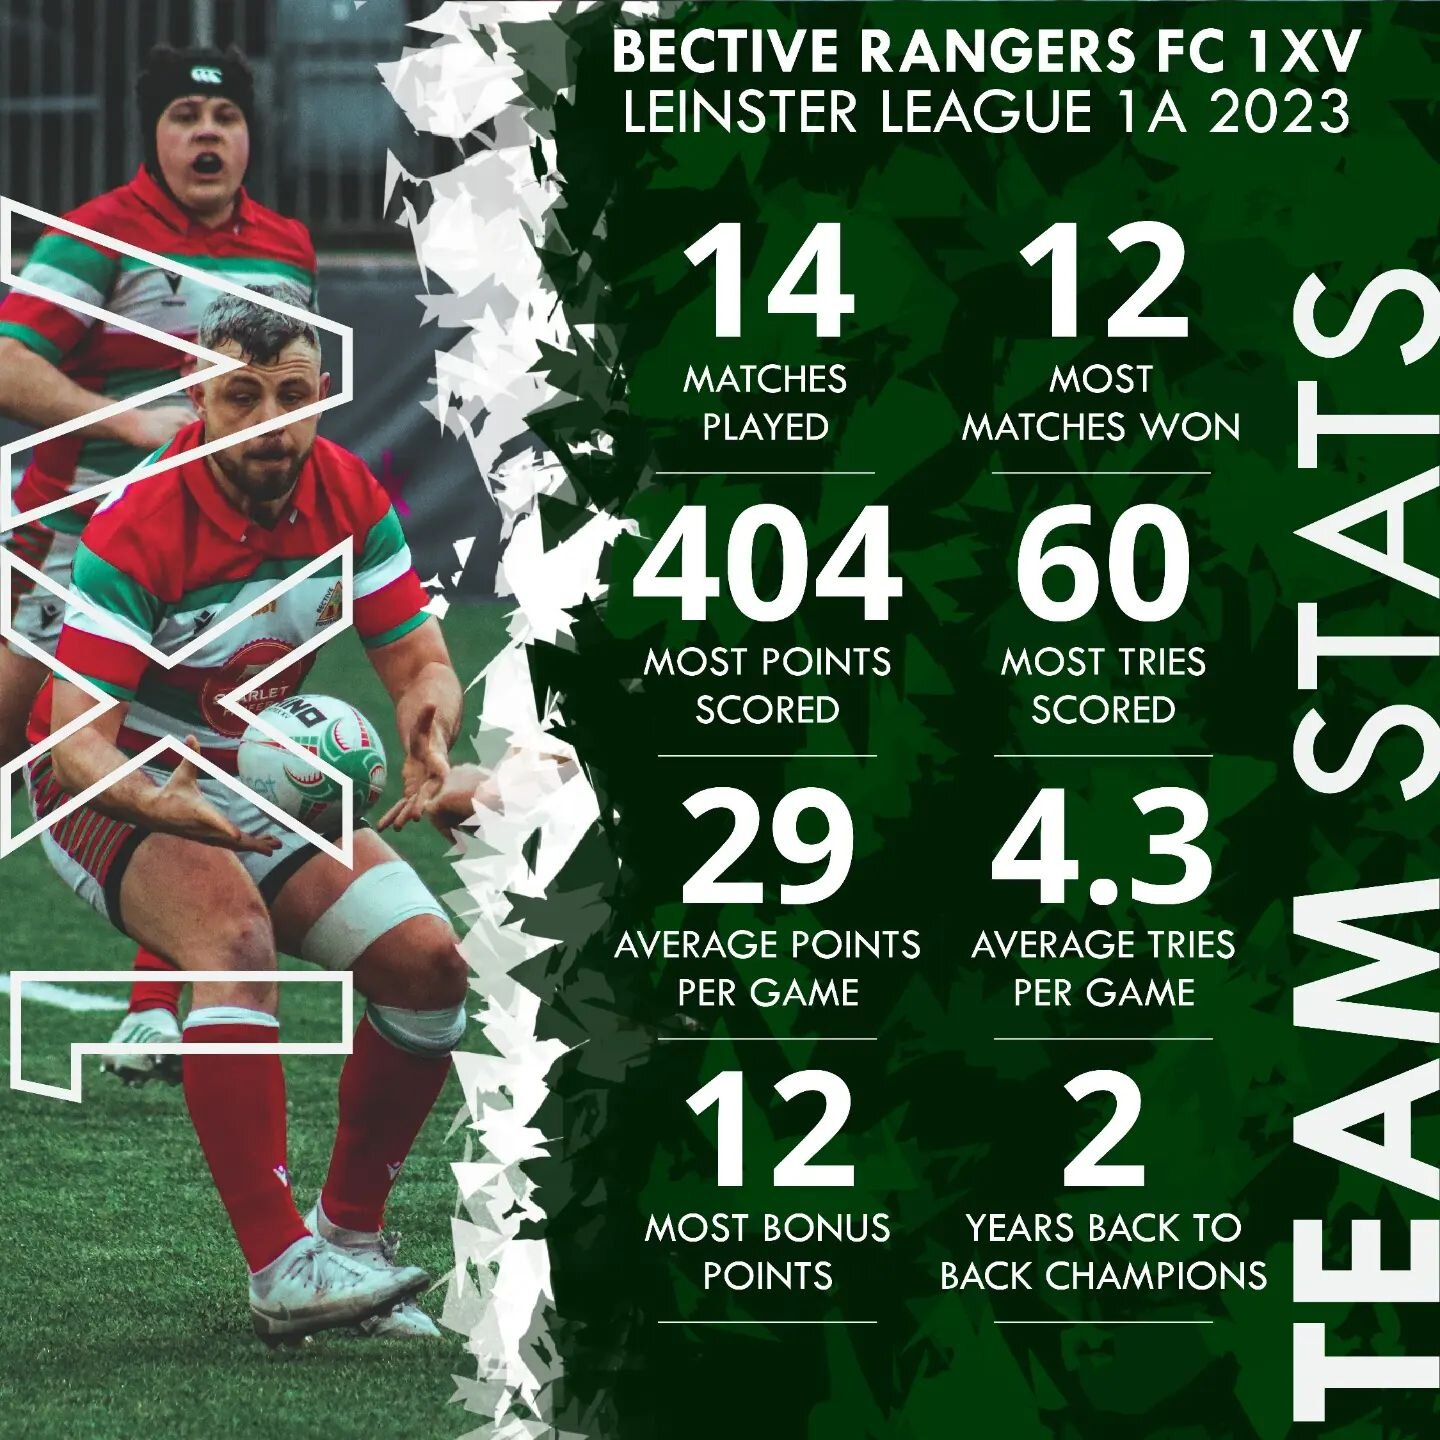 Our League campaigns this season in numbers! 📈 

All three Bective teams running in a huge amount of tries and points while also topping the charts in a number of areas this season.